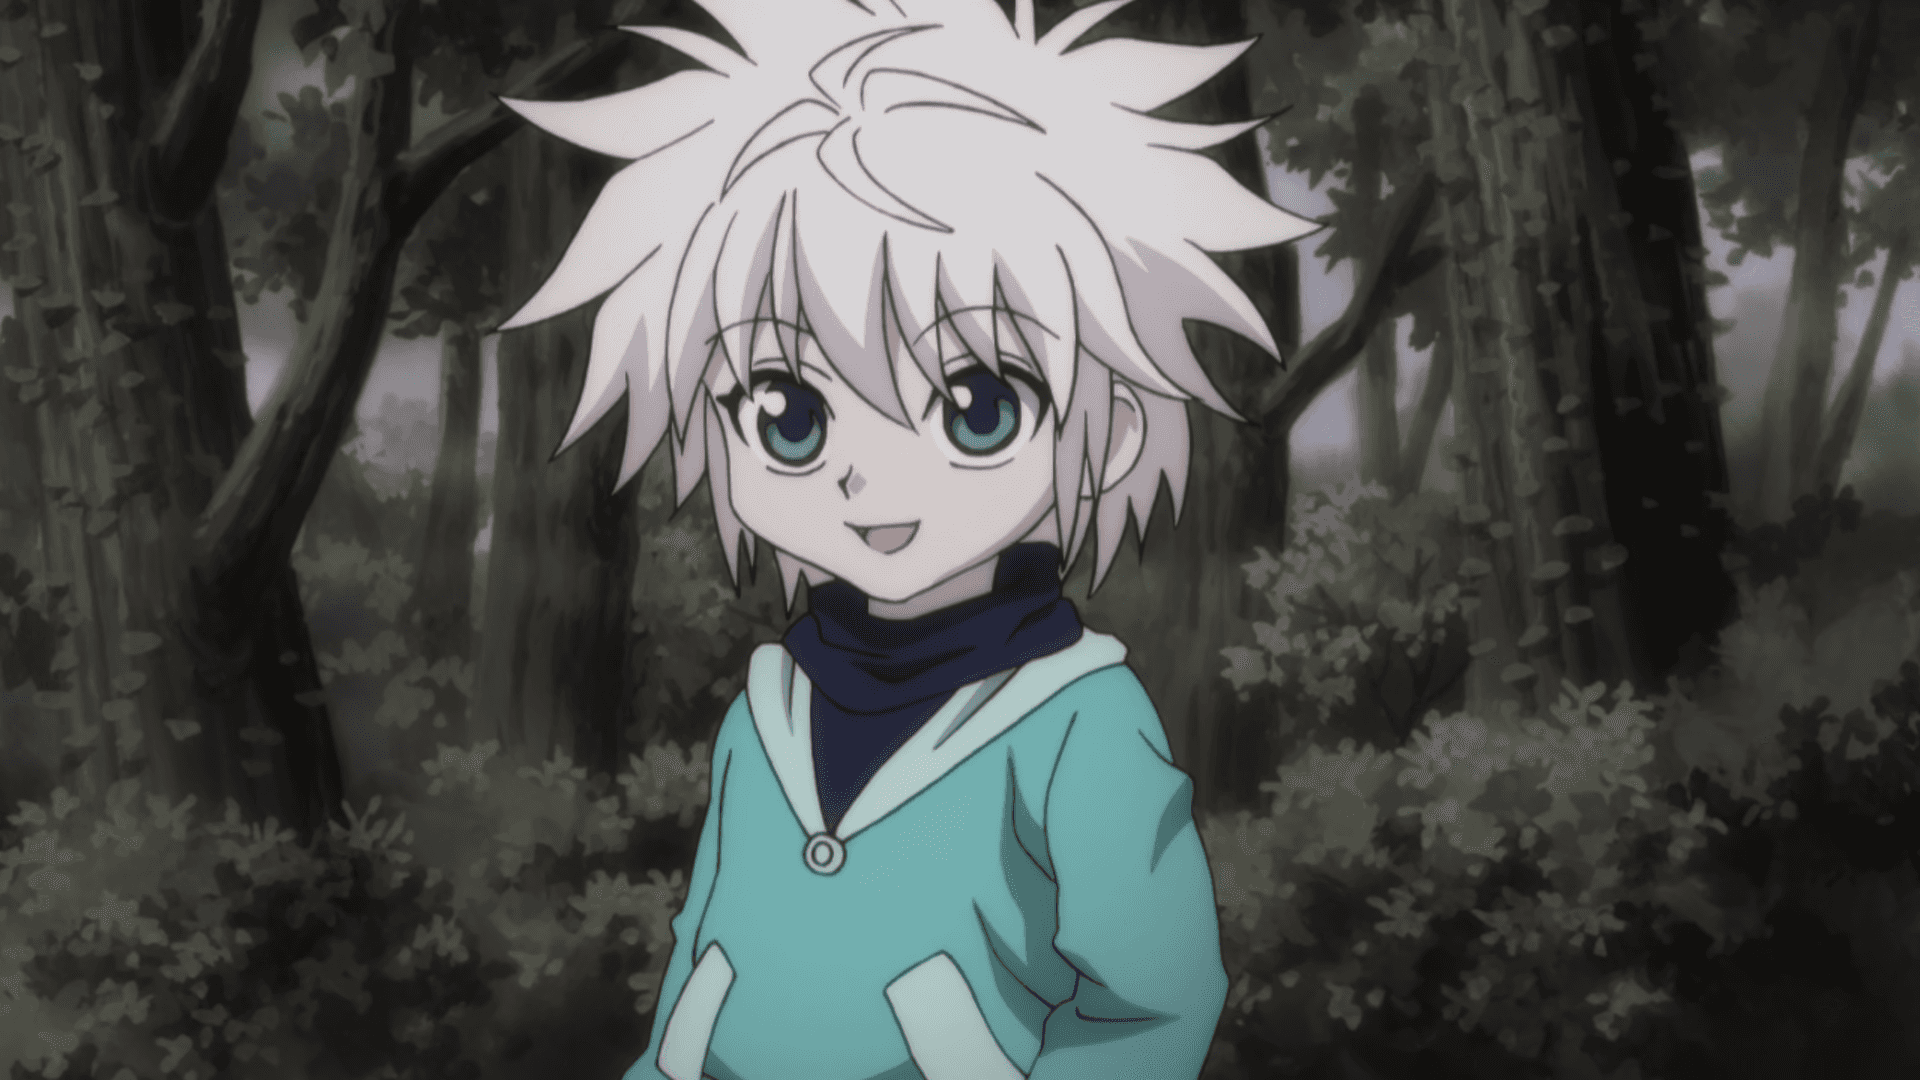 Killua trains diligently in preparation for his next adventure.